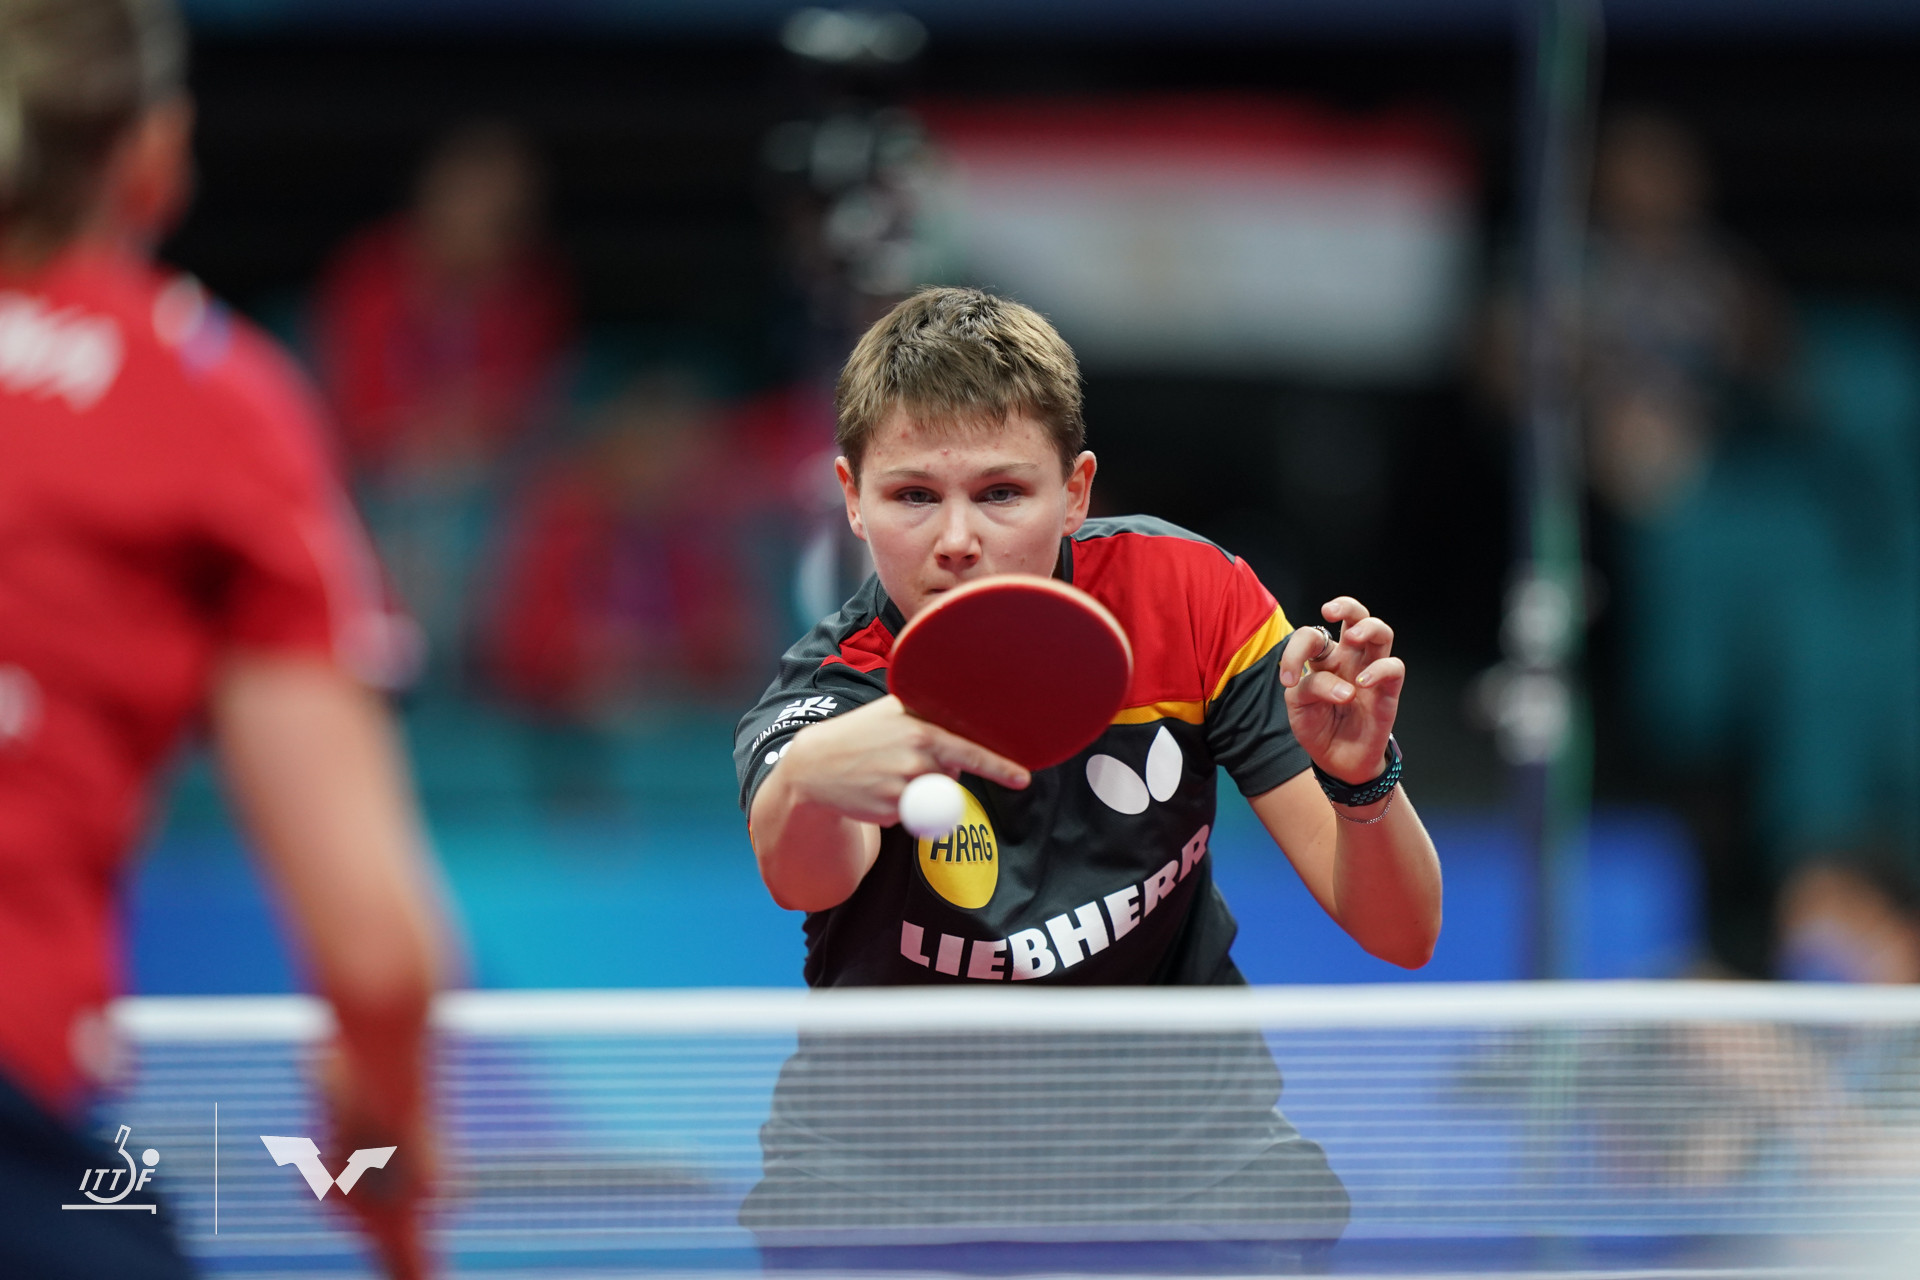 Germany and India among first qualified teams at ITTF World Team Table Tennis Championships